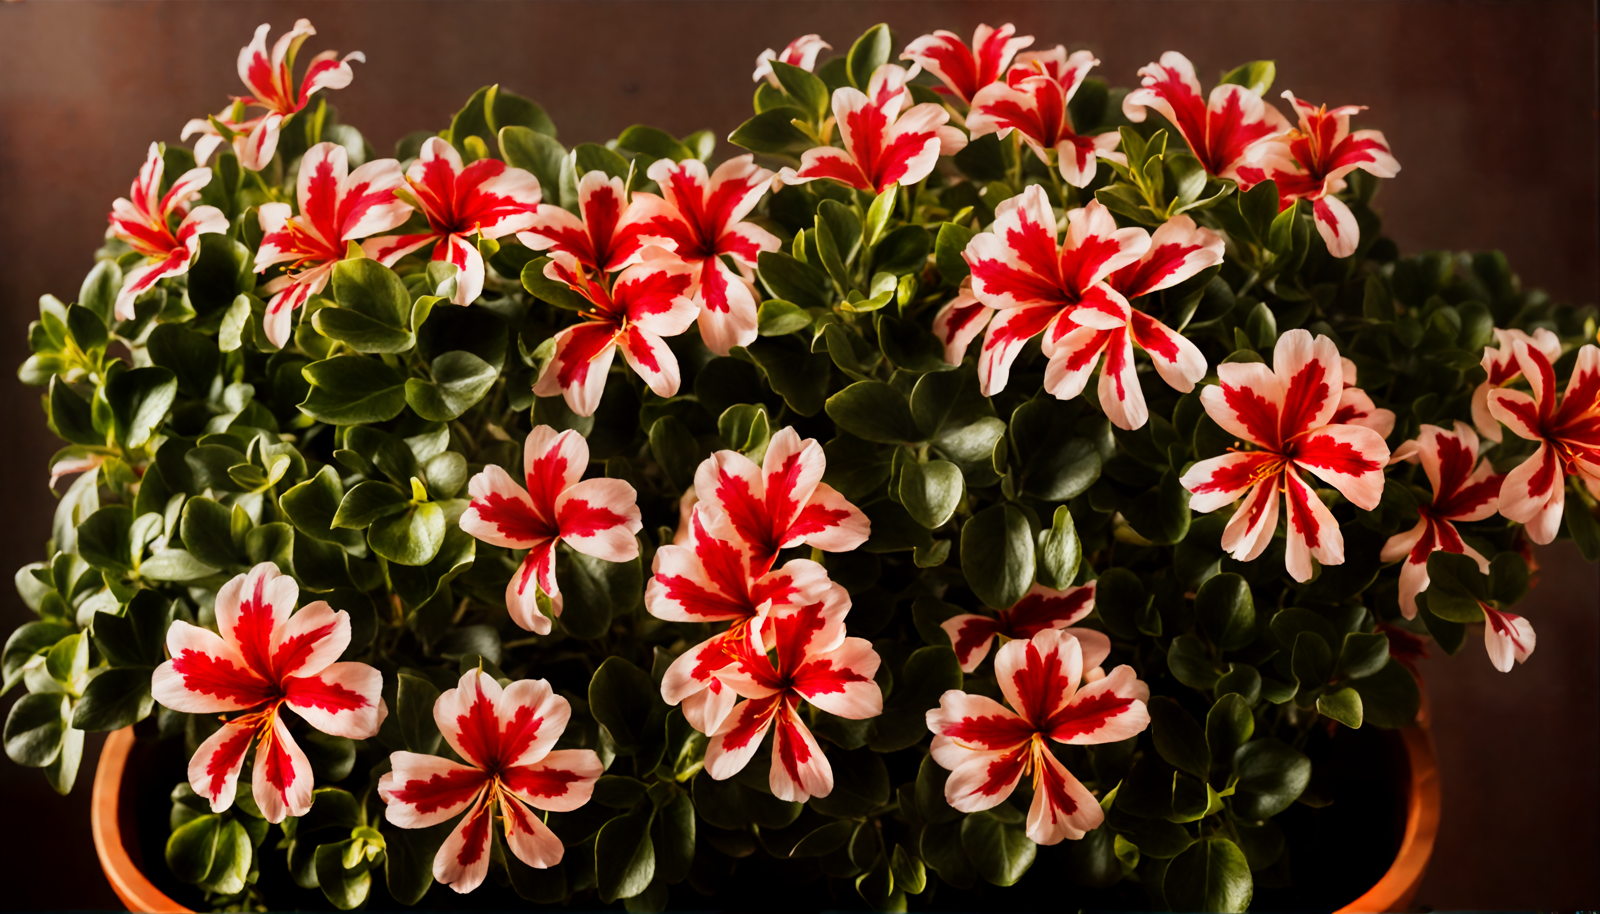 Vivid red and white Pelargonium peltatum flowers in a vase, with clear lighting against a dark background.